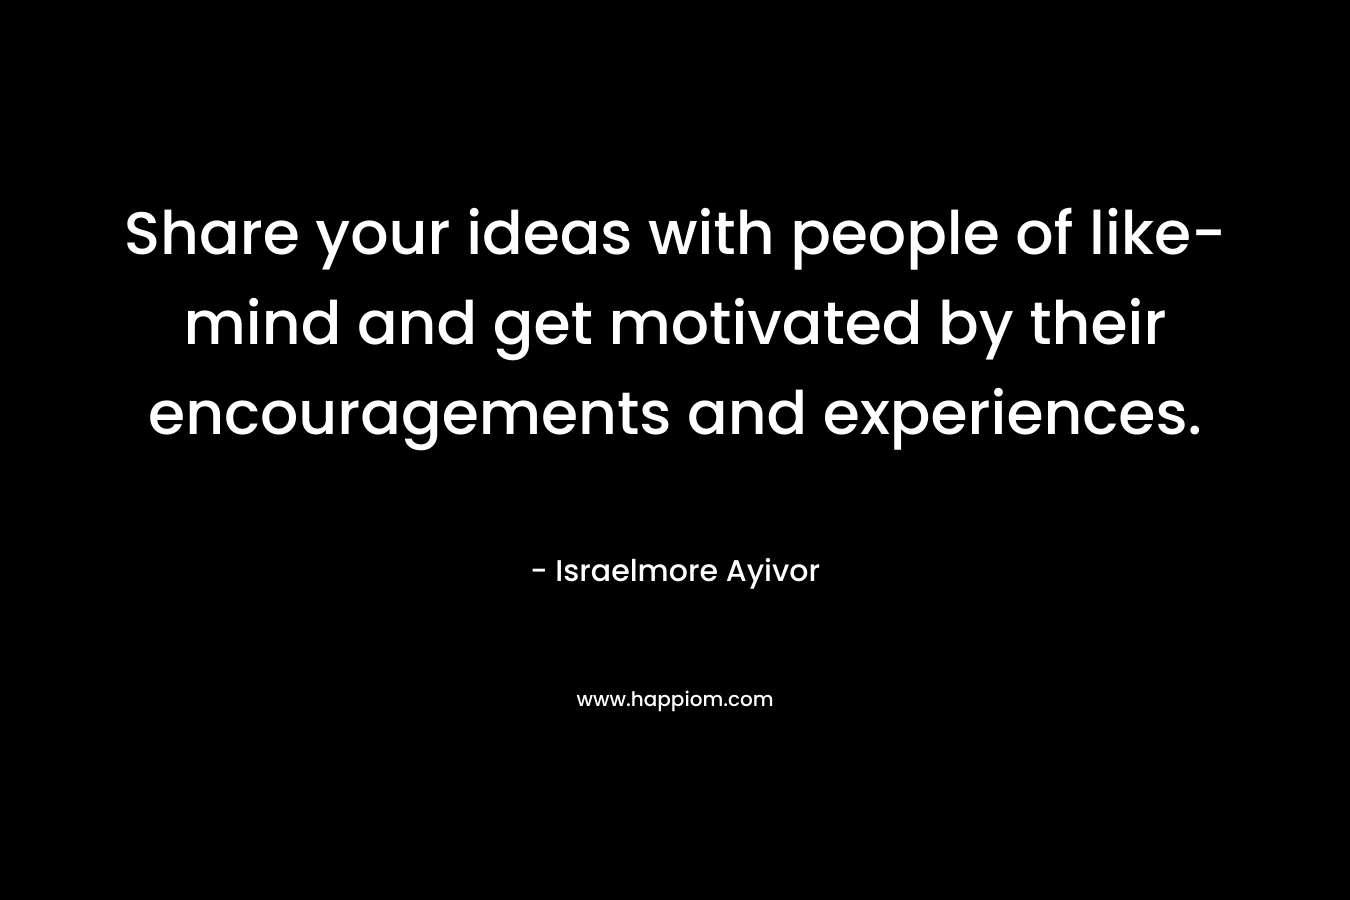 Share your ideas with people of like-mind and get motivated by their encouragements and experiences.